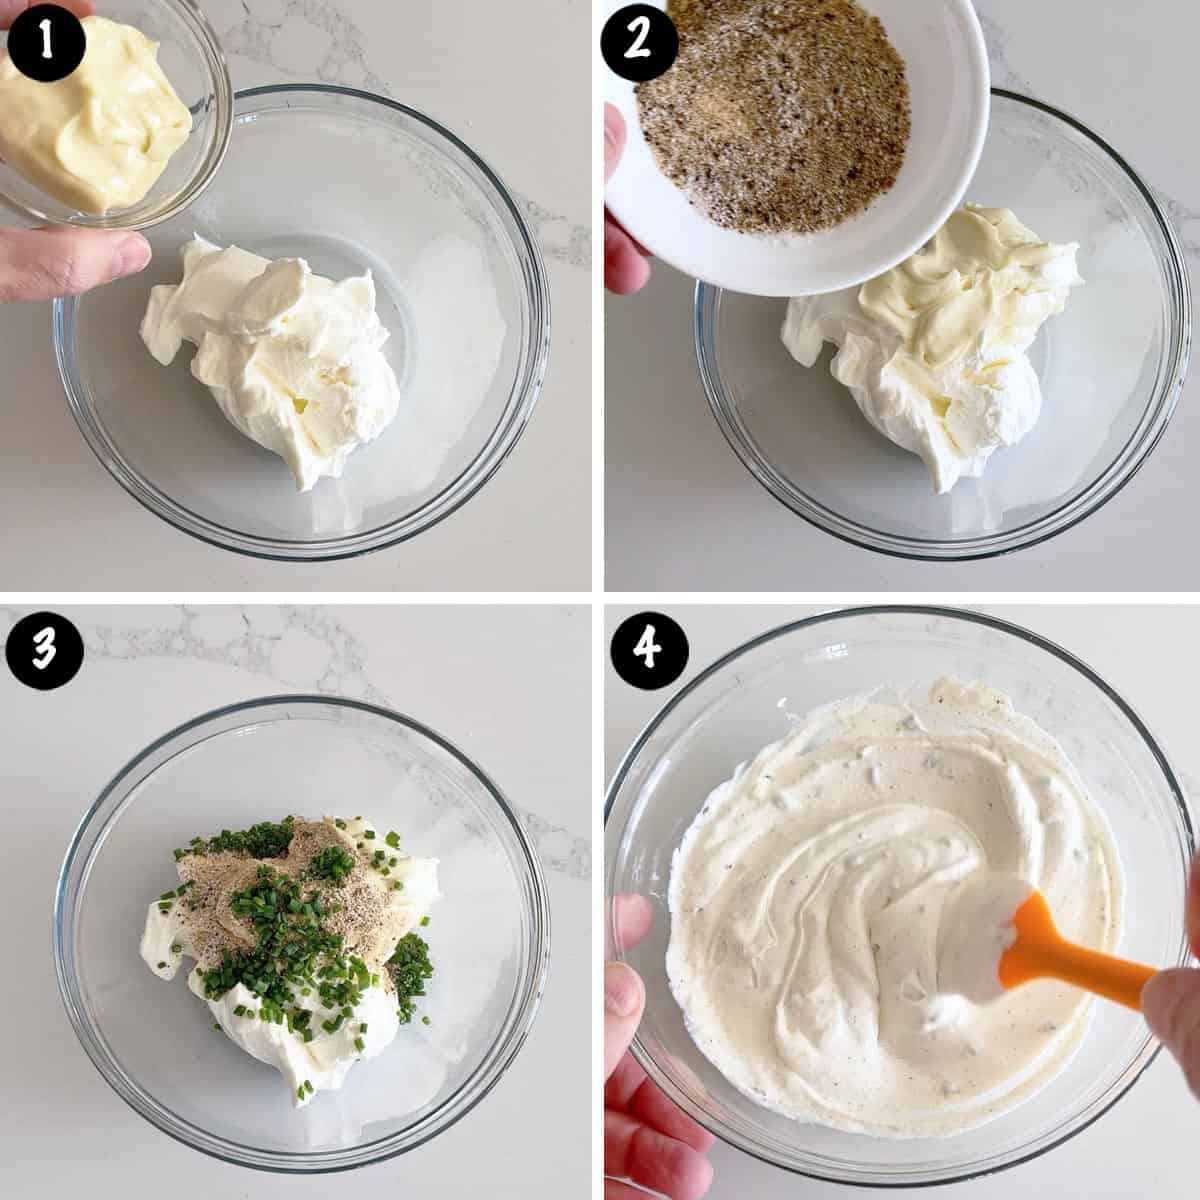 A four-photo collage showing the steps for making a sour cream dip. 